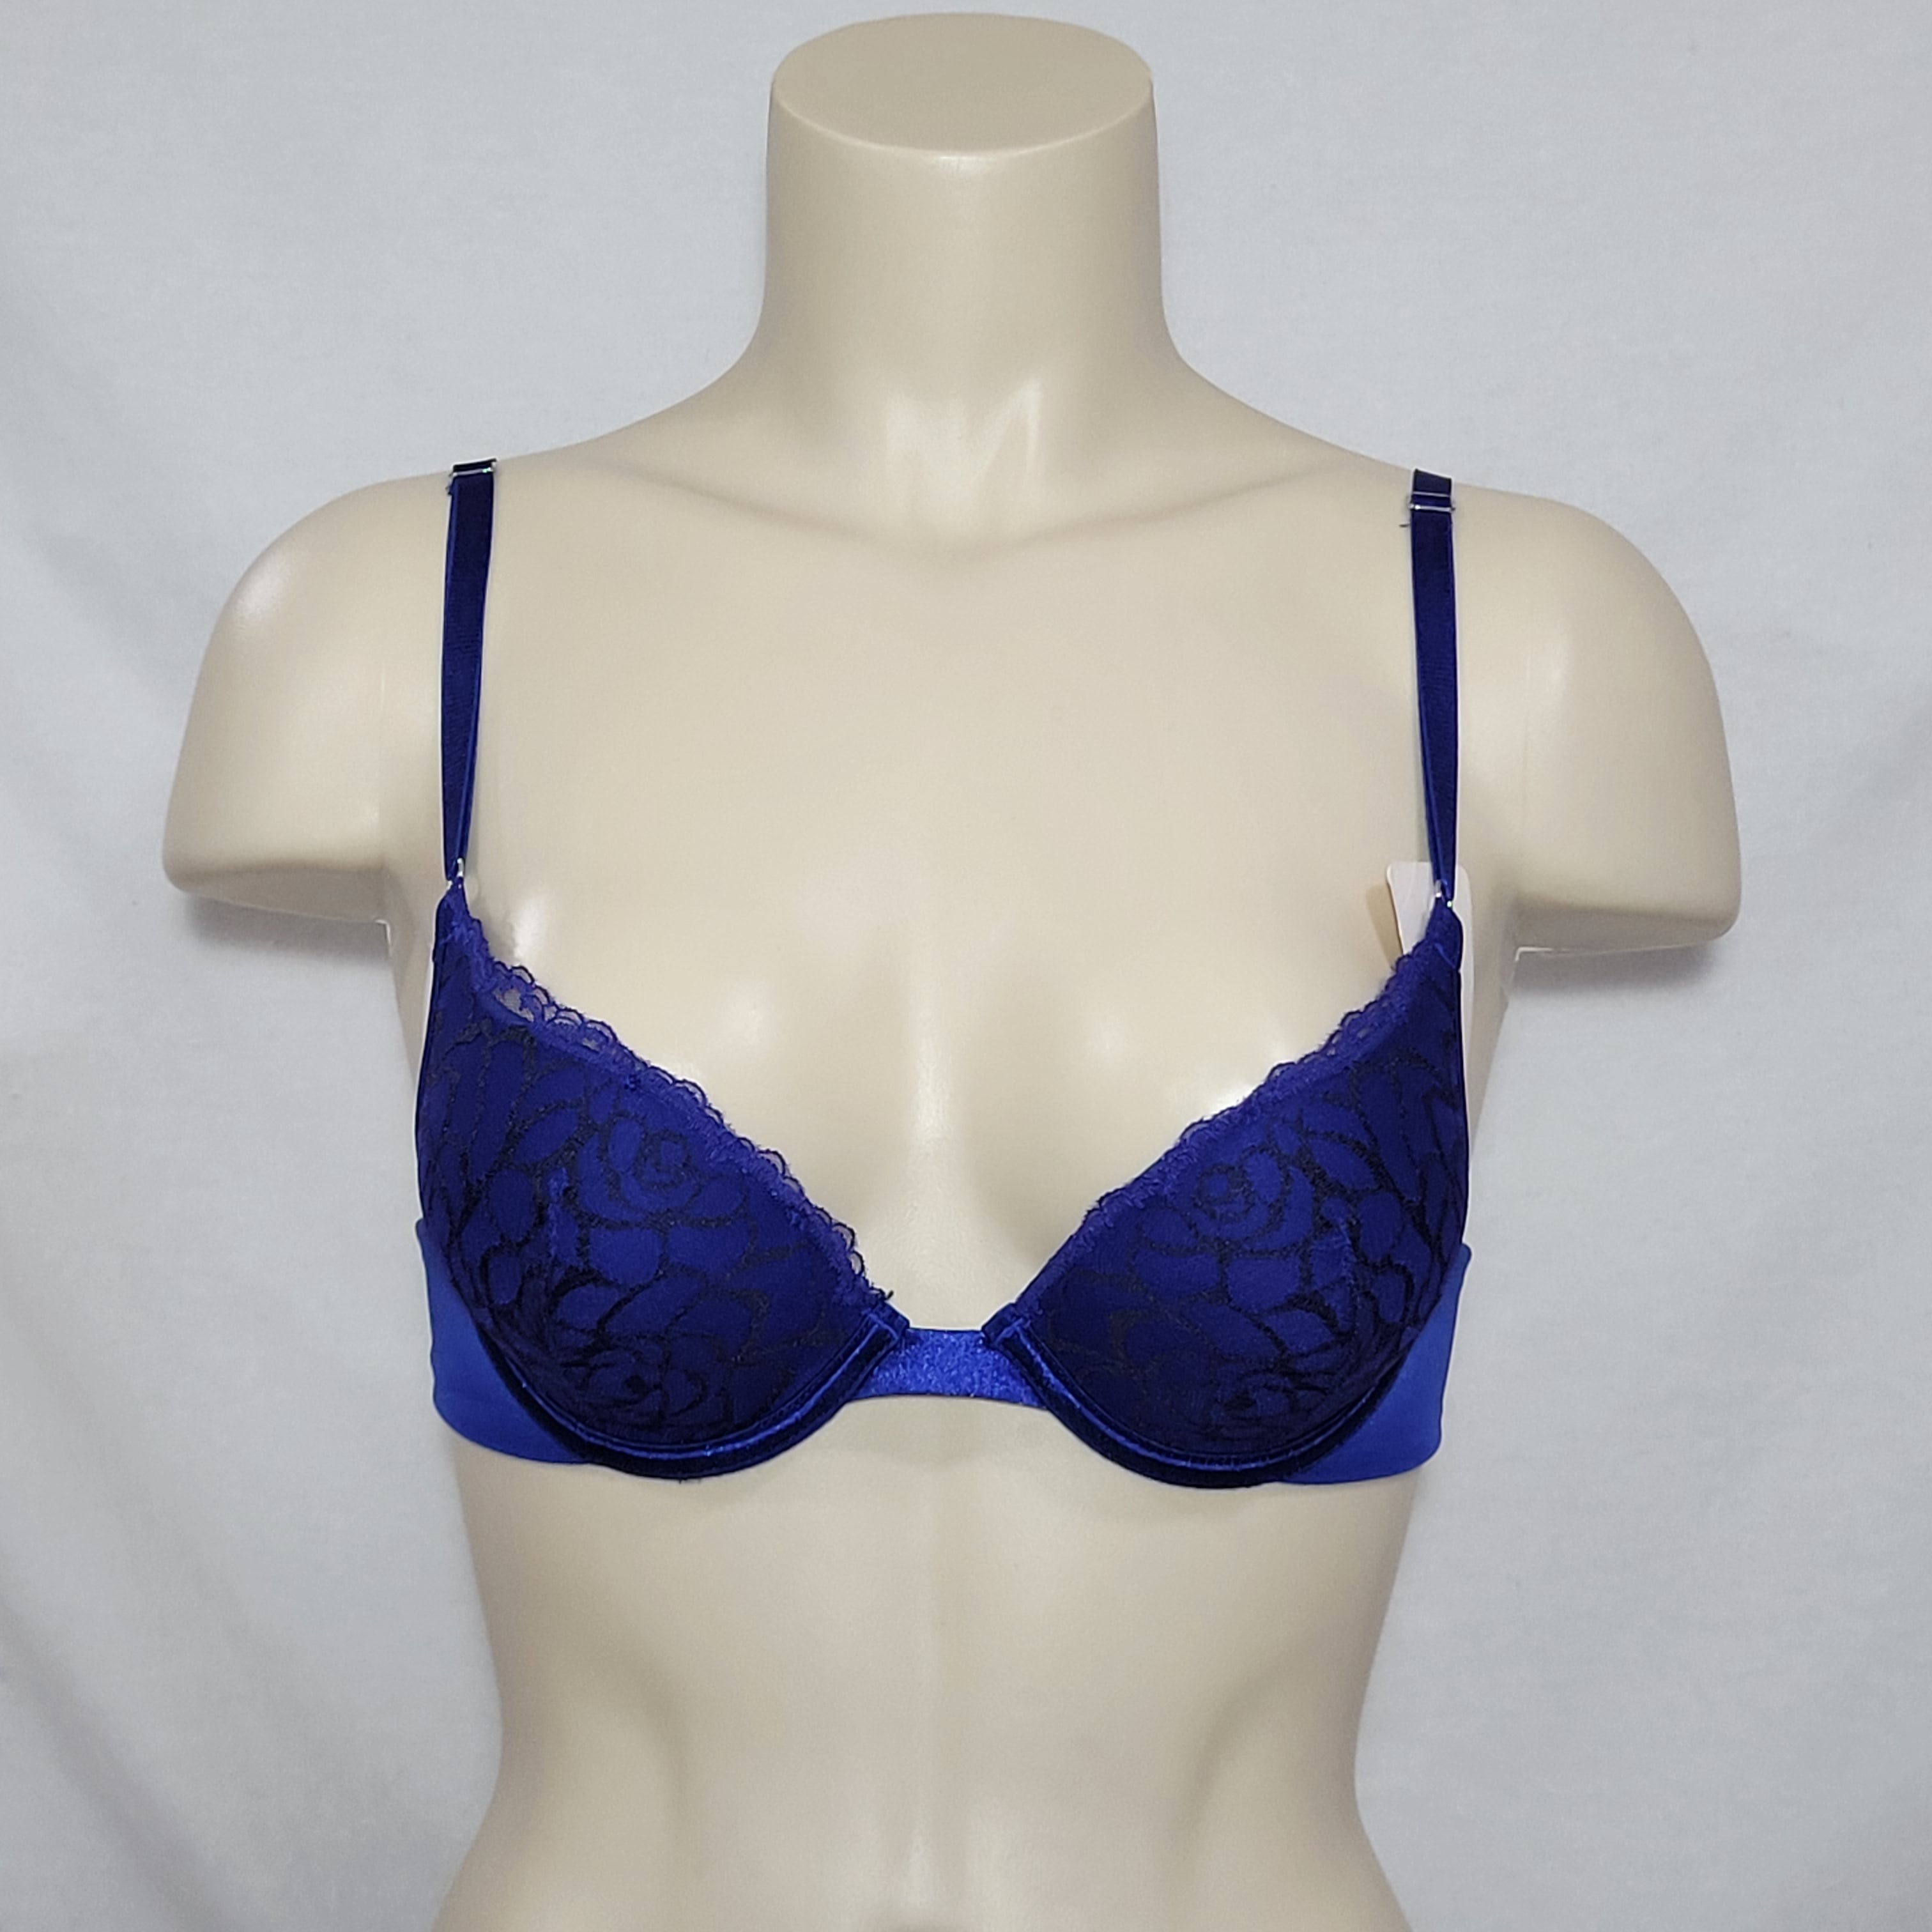 Lily of France 2131701 Soiree Extreme Ego Boost Lace UW Bra